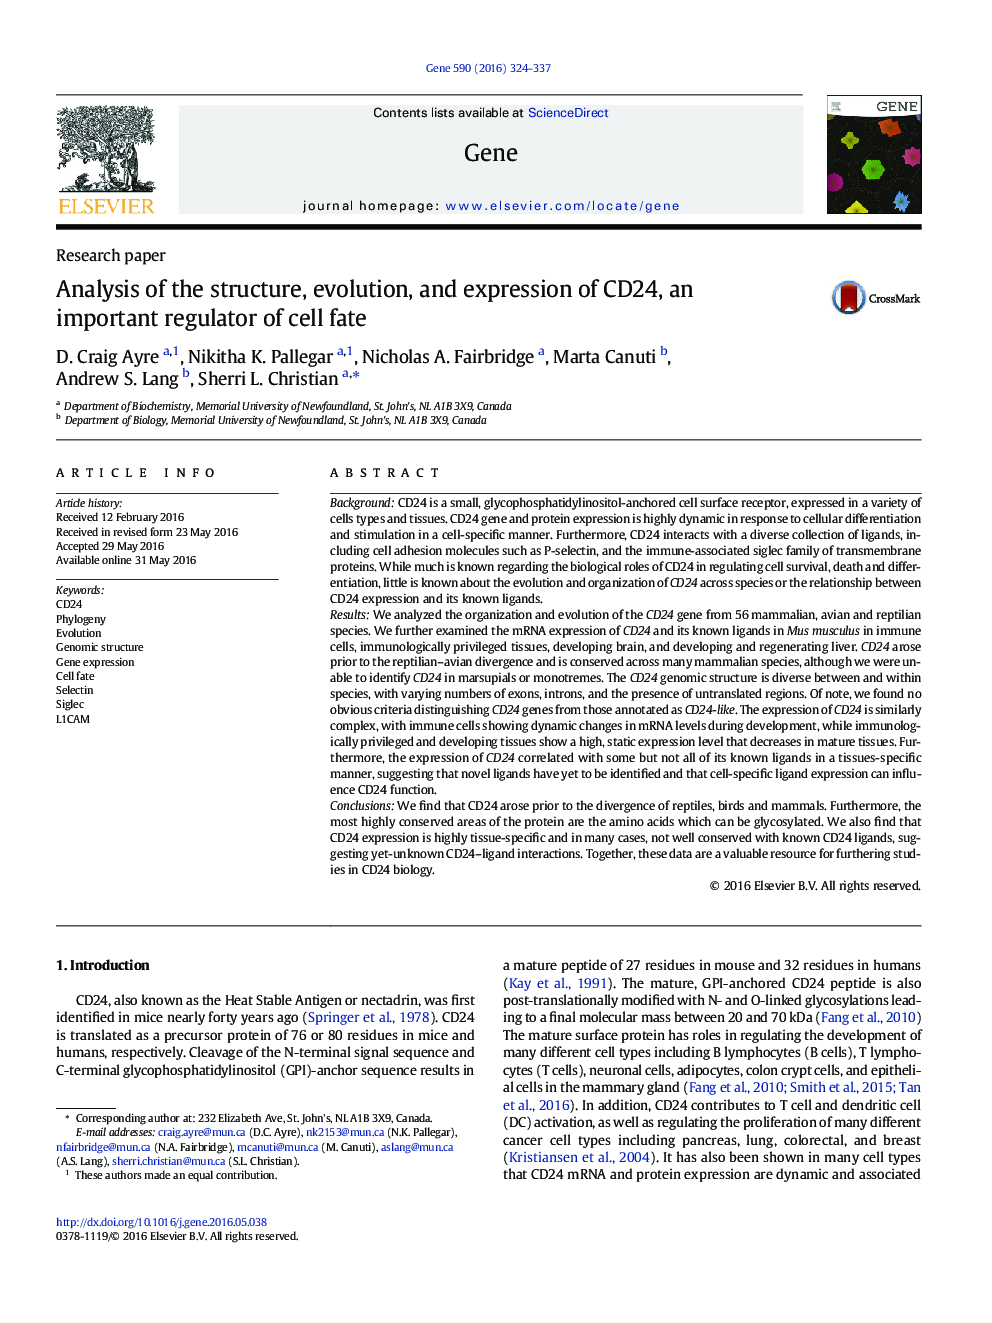 Analysis of the structure, evolution, and expression of CD24, an important regulator of cell fate